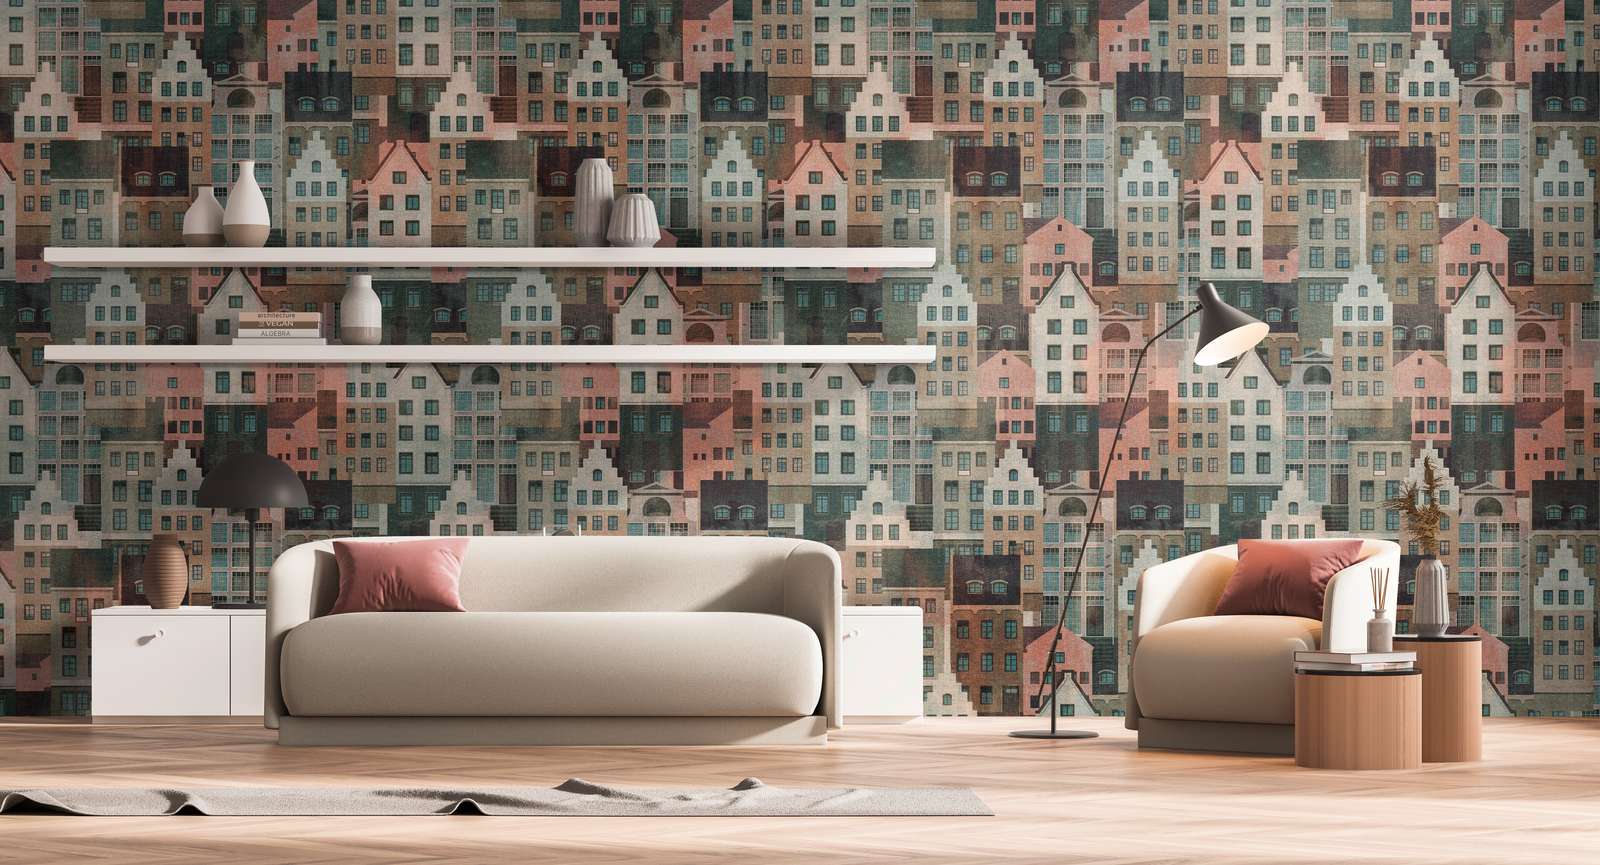             Wallpaper with striking houses pattern - colourful, blue, pink
        